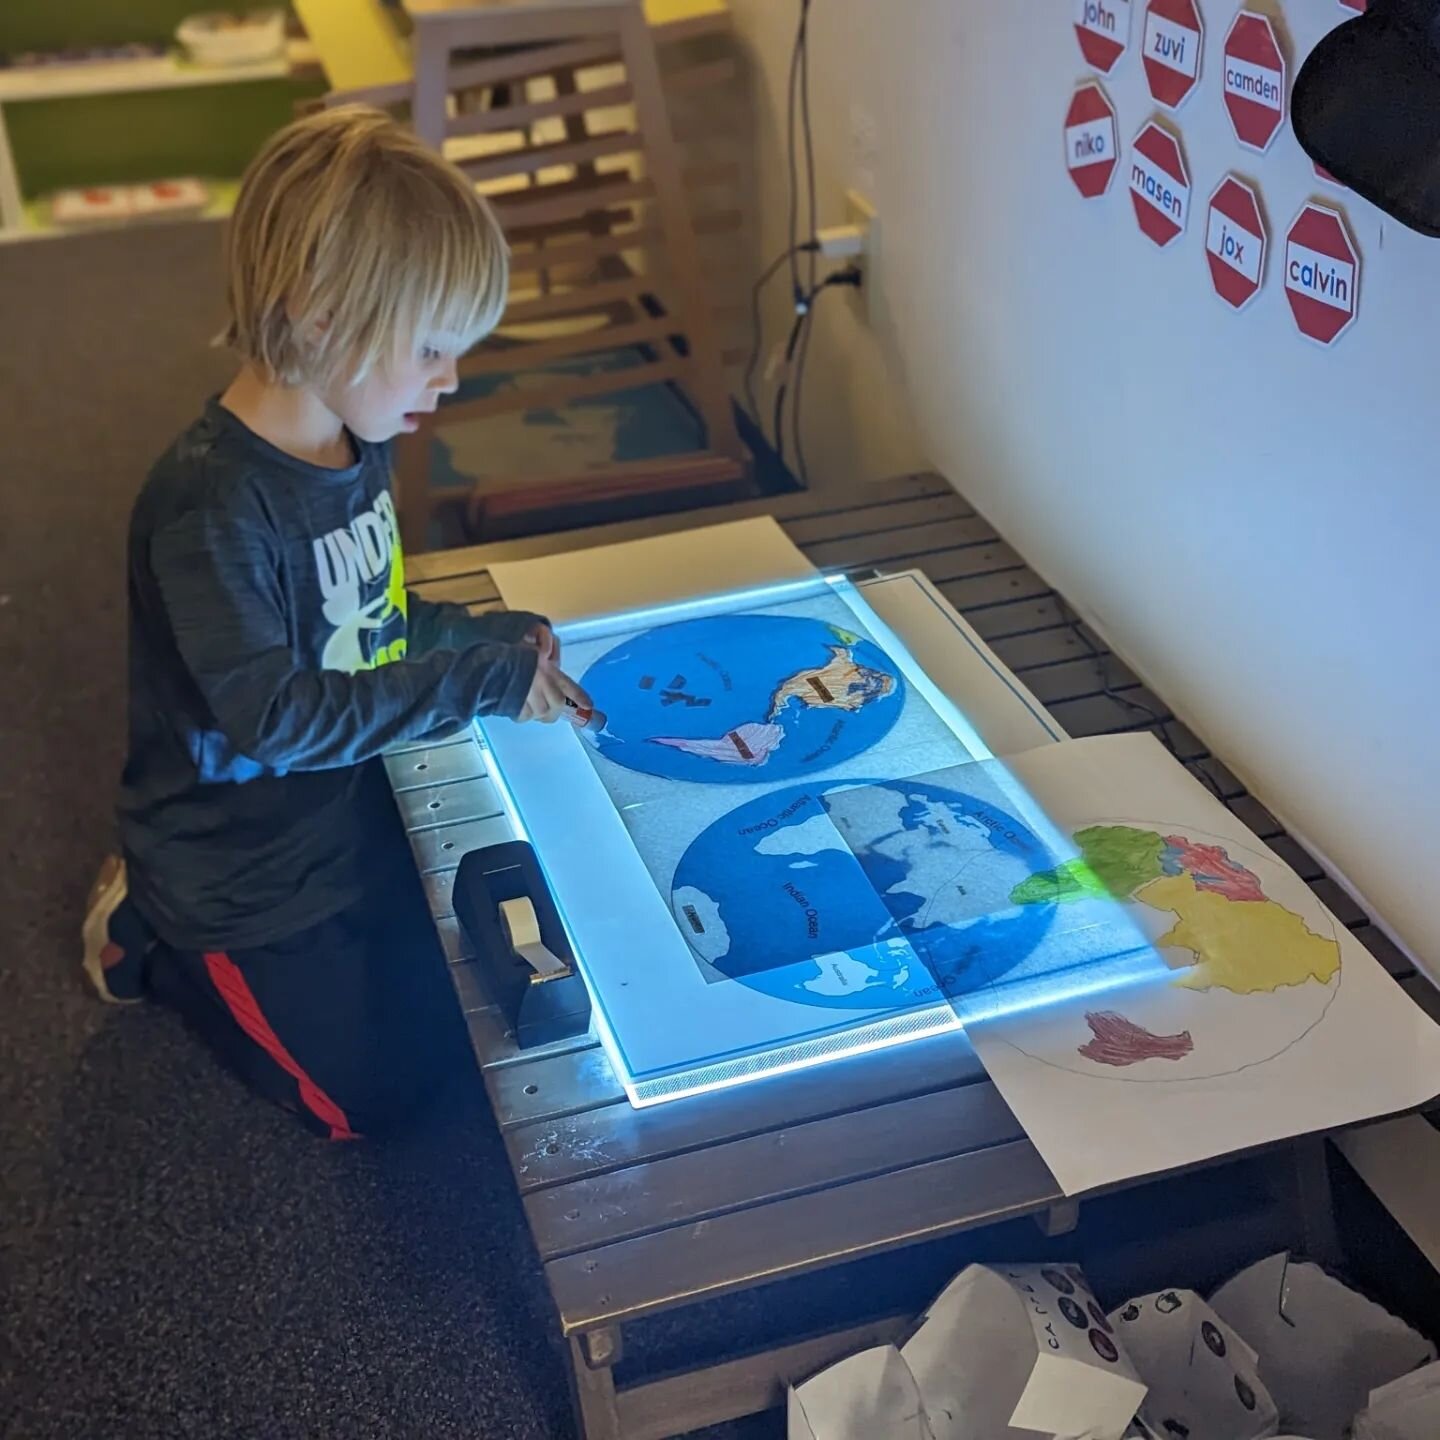 The power of a Mixed-Age child-led classroom: One of our young Spark heroes became interested in maps. His deep focus and work has now inspired a studio full of cartographers! 

#Montessori #ChildLed #LearnerDriven